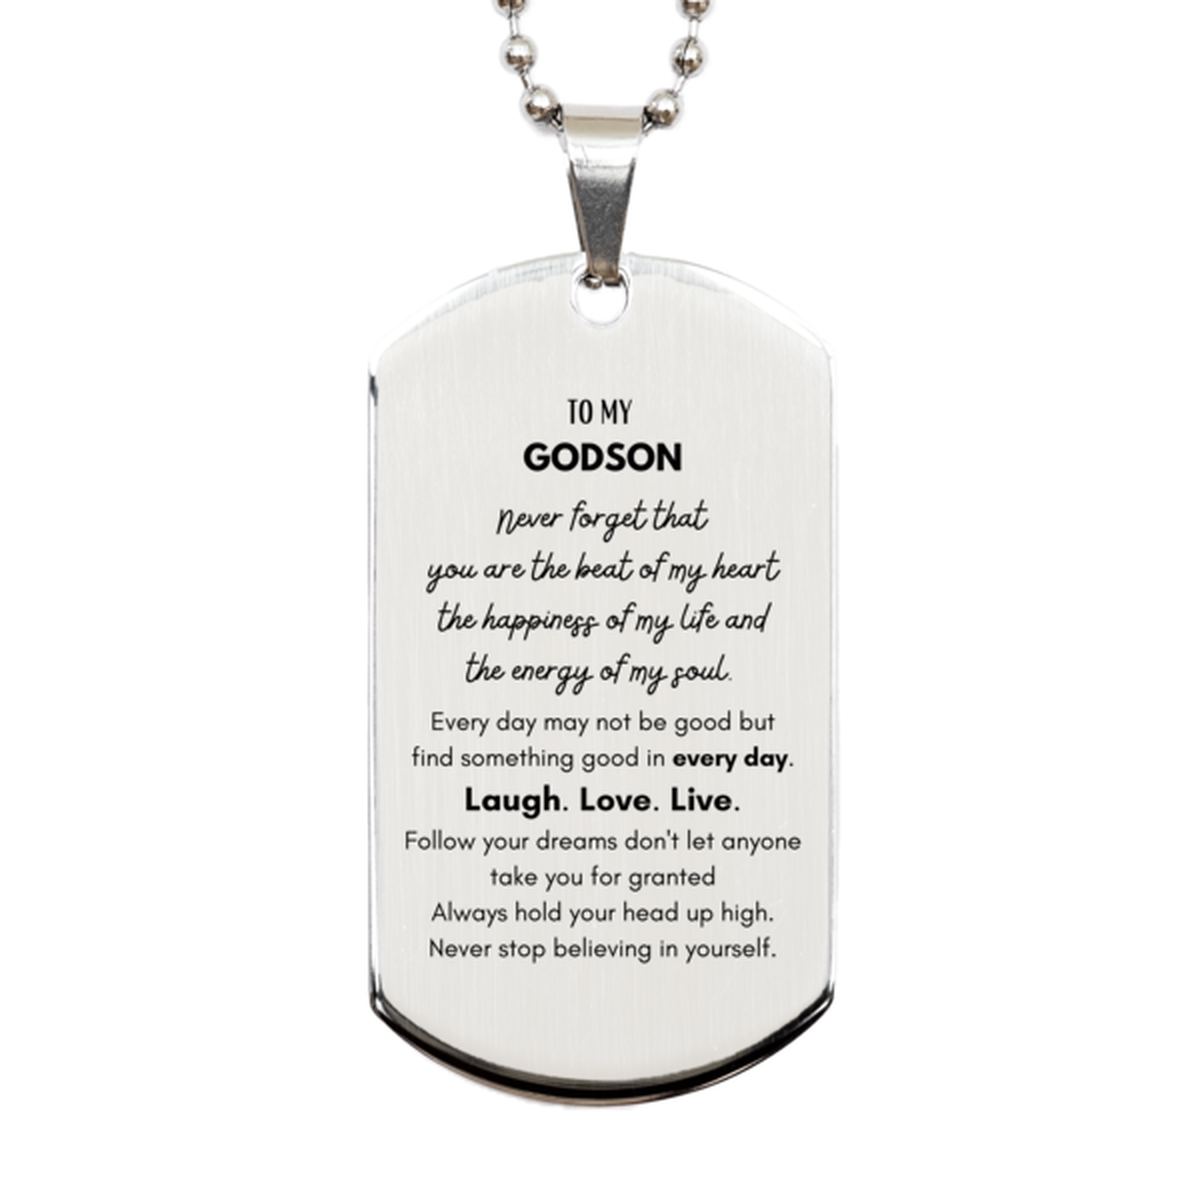 To My Godson Dogtag Gifts, Christmas Godson Silver Dog Tag Present, Birthday Unique Motivational For Godson, To My Godson Never forget that you are the beat of my heart the happiness of my life and the energy of my soul